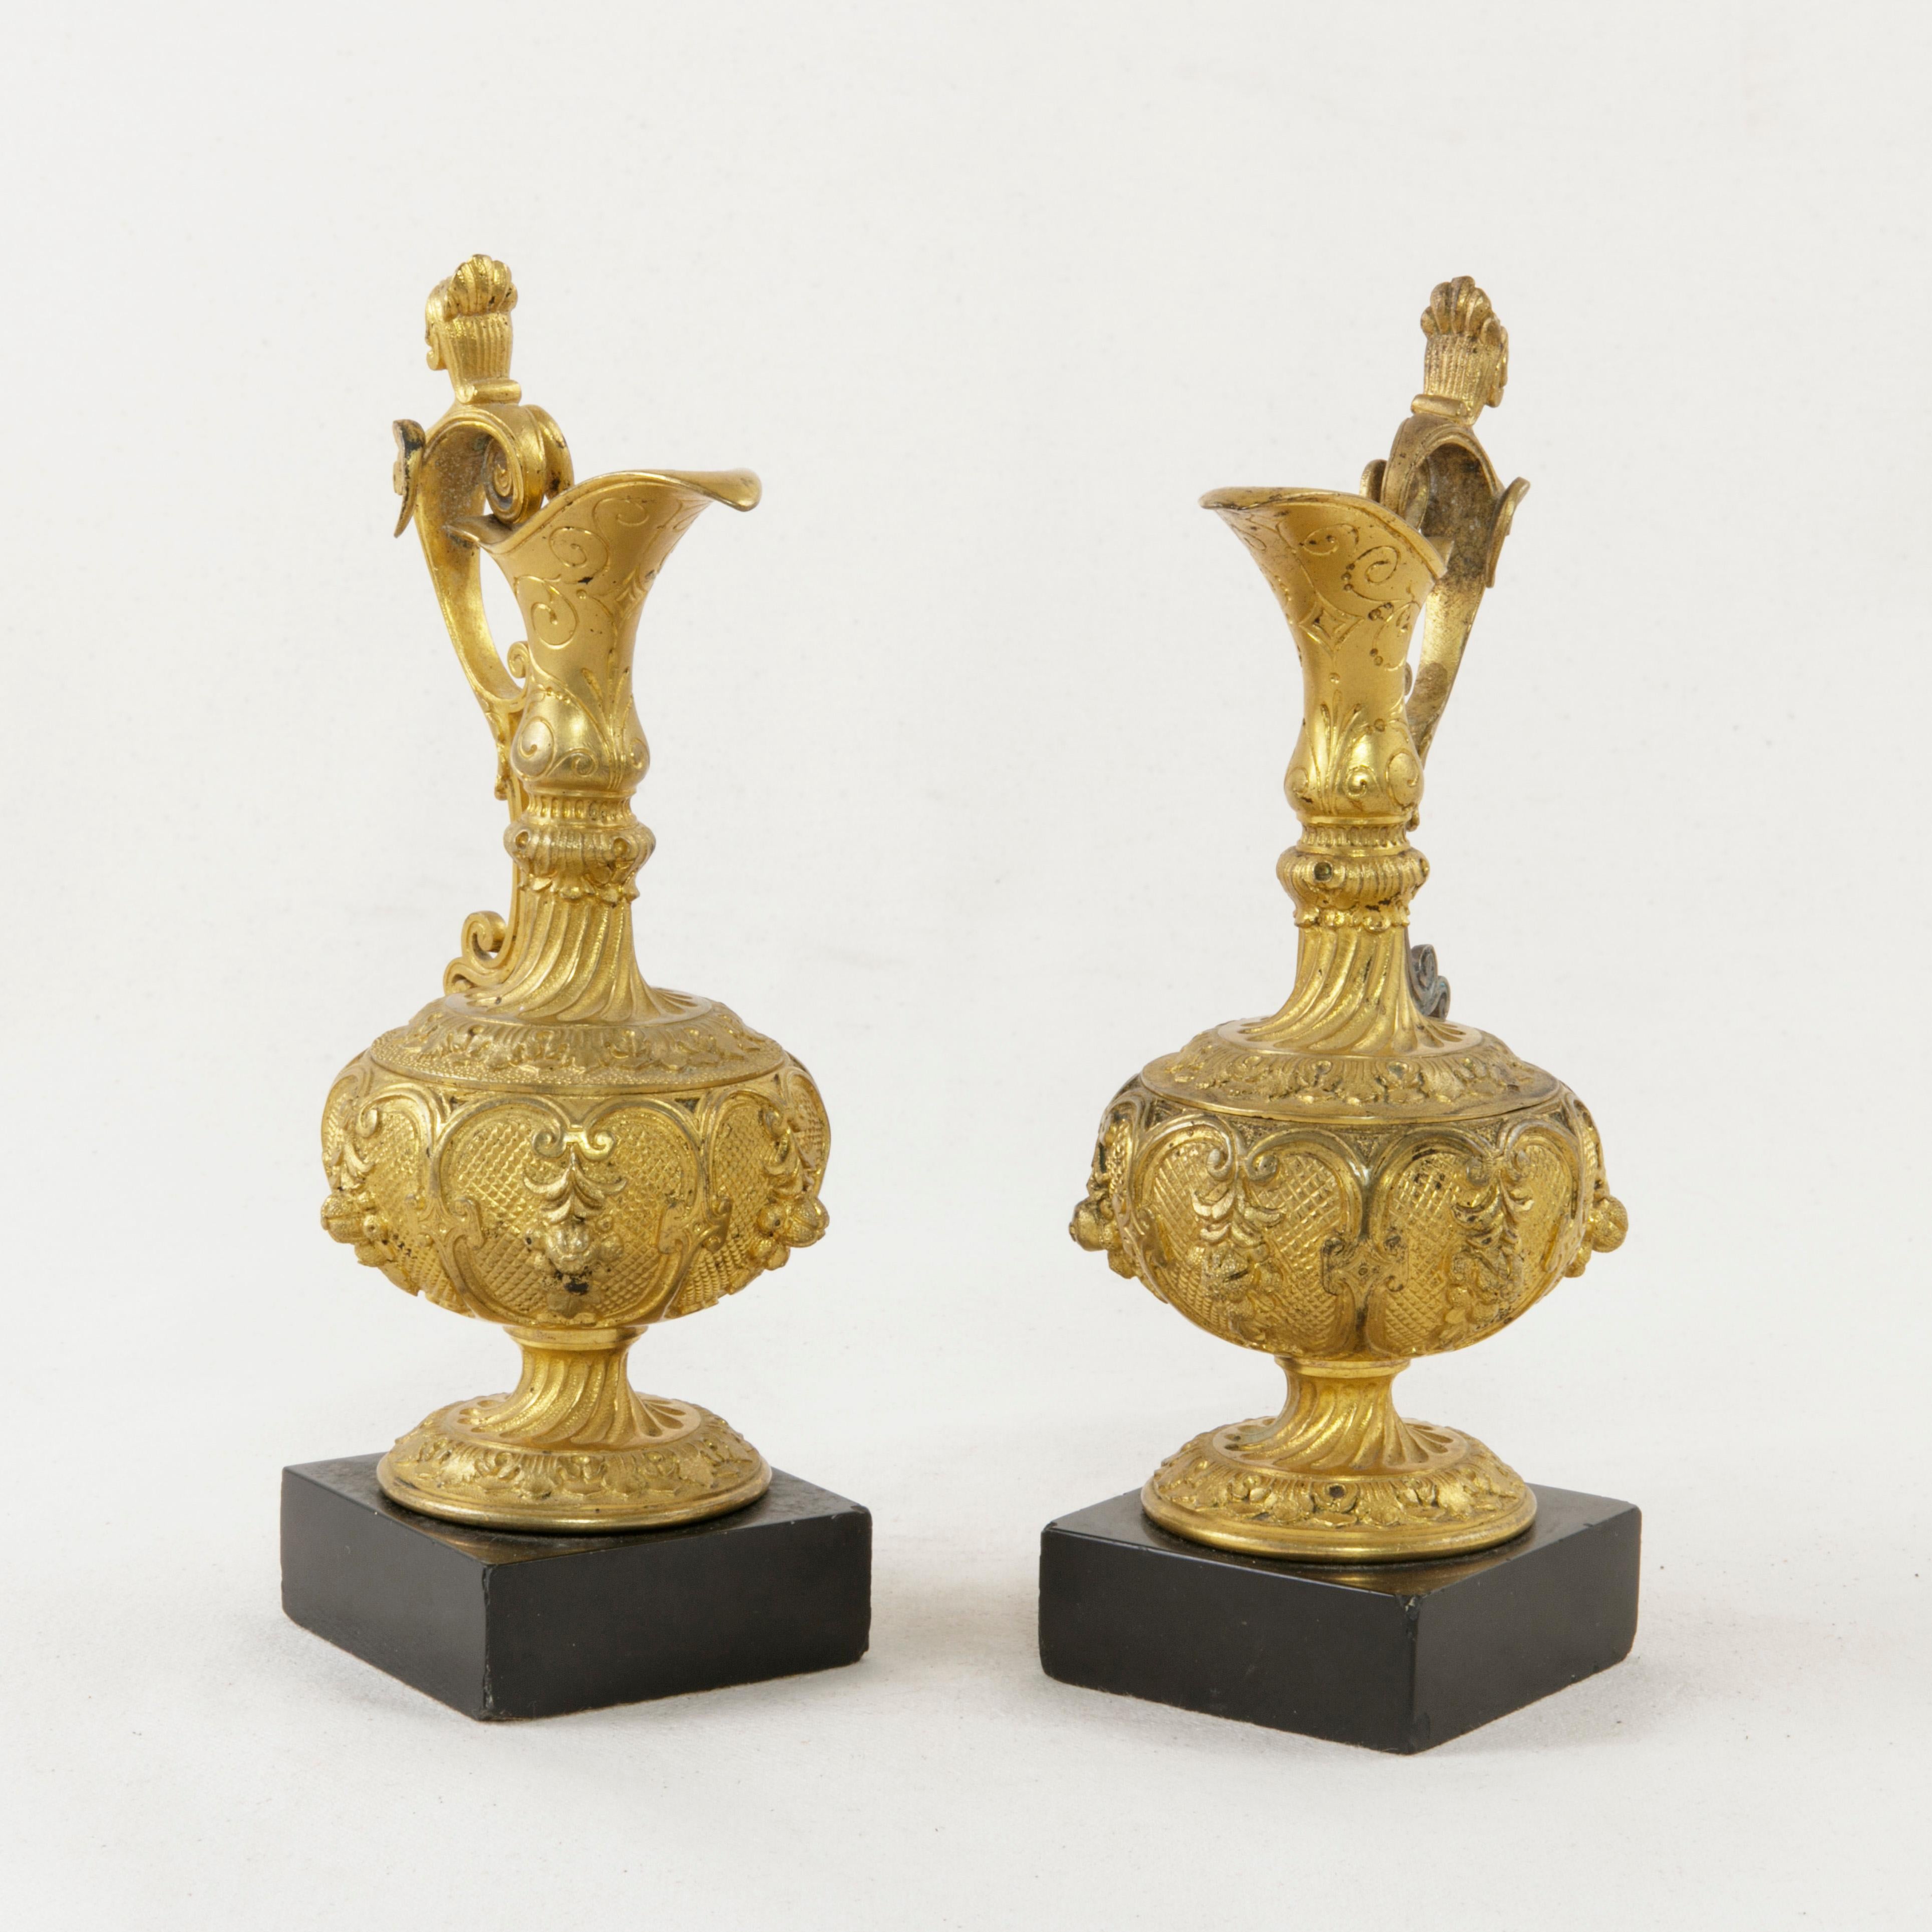 This pair of mid-19th century French Napoleon III period gilt bronze cruets features elegant detailing of leaves and winged female busts on the scrolling handles. A long spout is finished with incised scrolling. Each cruet rests on a 2.25 inch